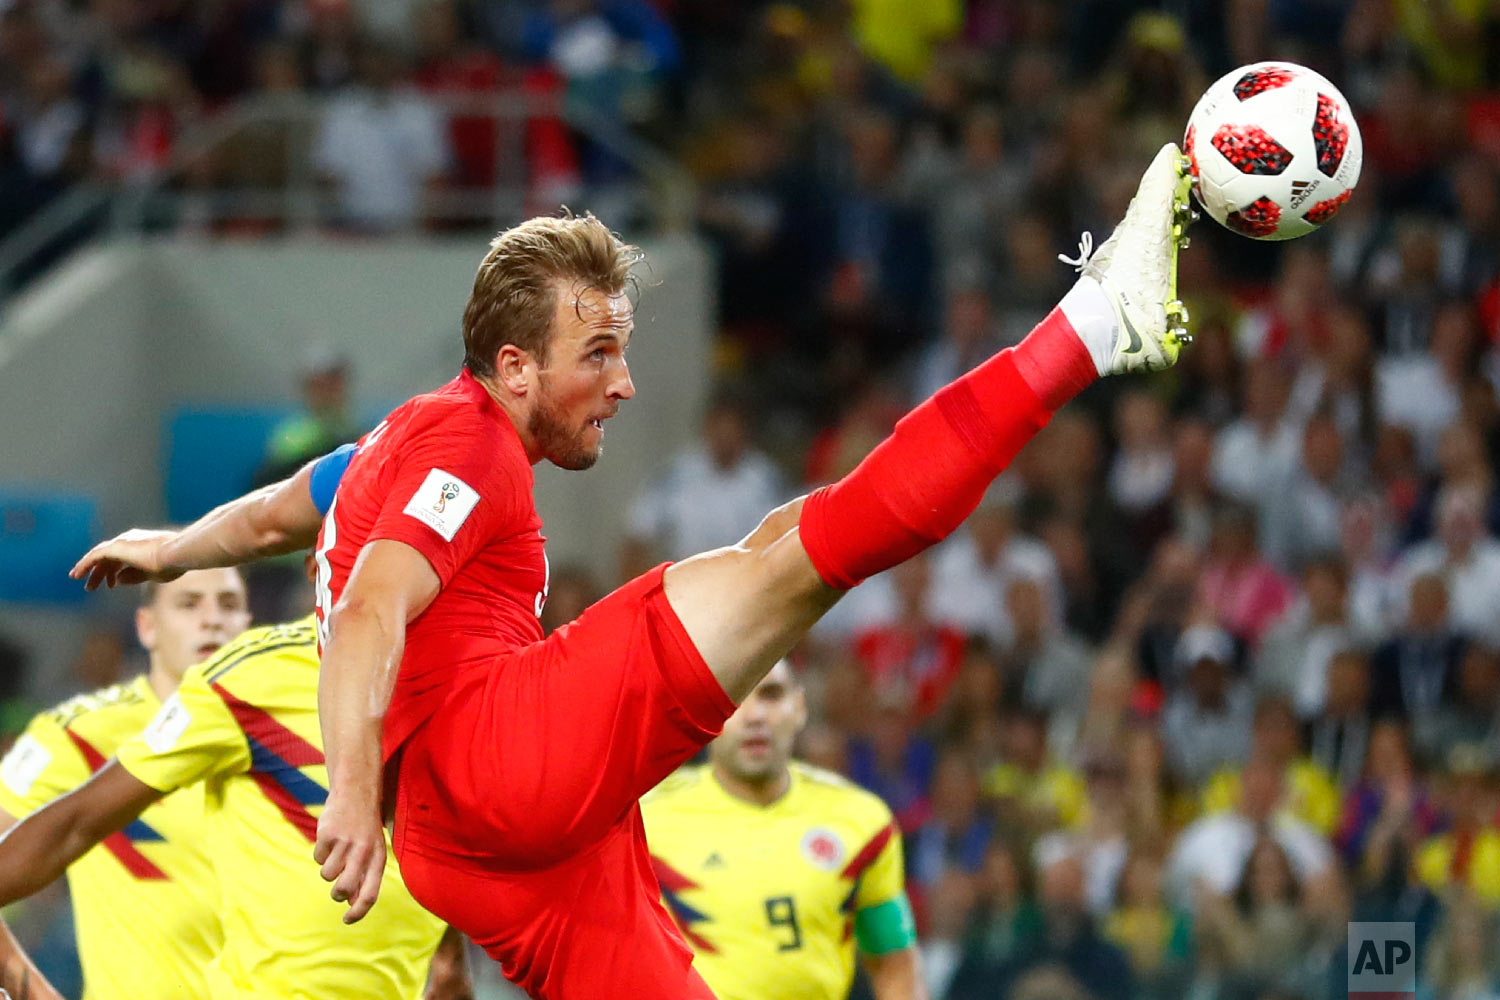  England's Harry Kane tries to control the ball during the round of 16 match between Colombia and England at the 2018 soccer World Cup in the Spartak Stadium, in Moscow, Russia on July 3, 2018. (AP Photo/Matthias Schrader) 